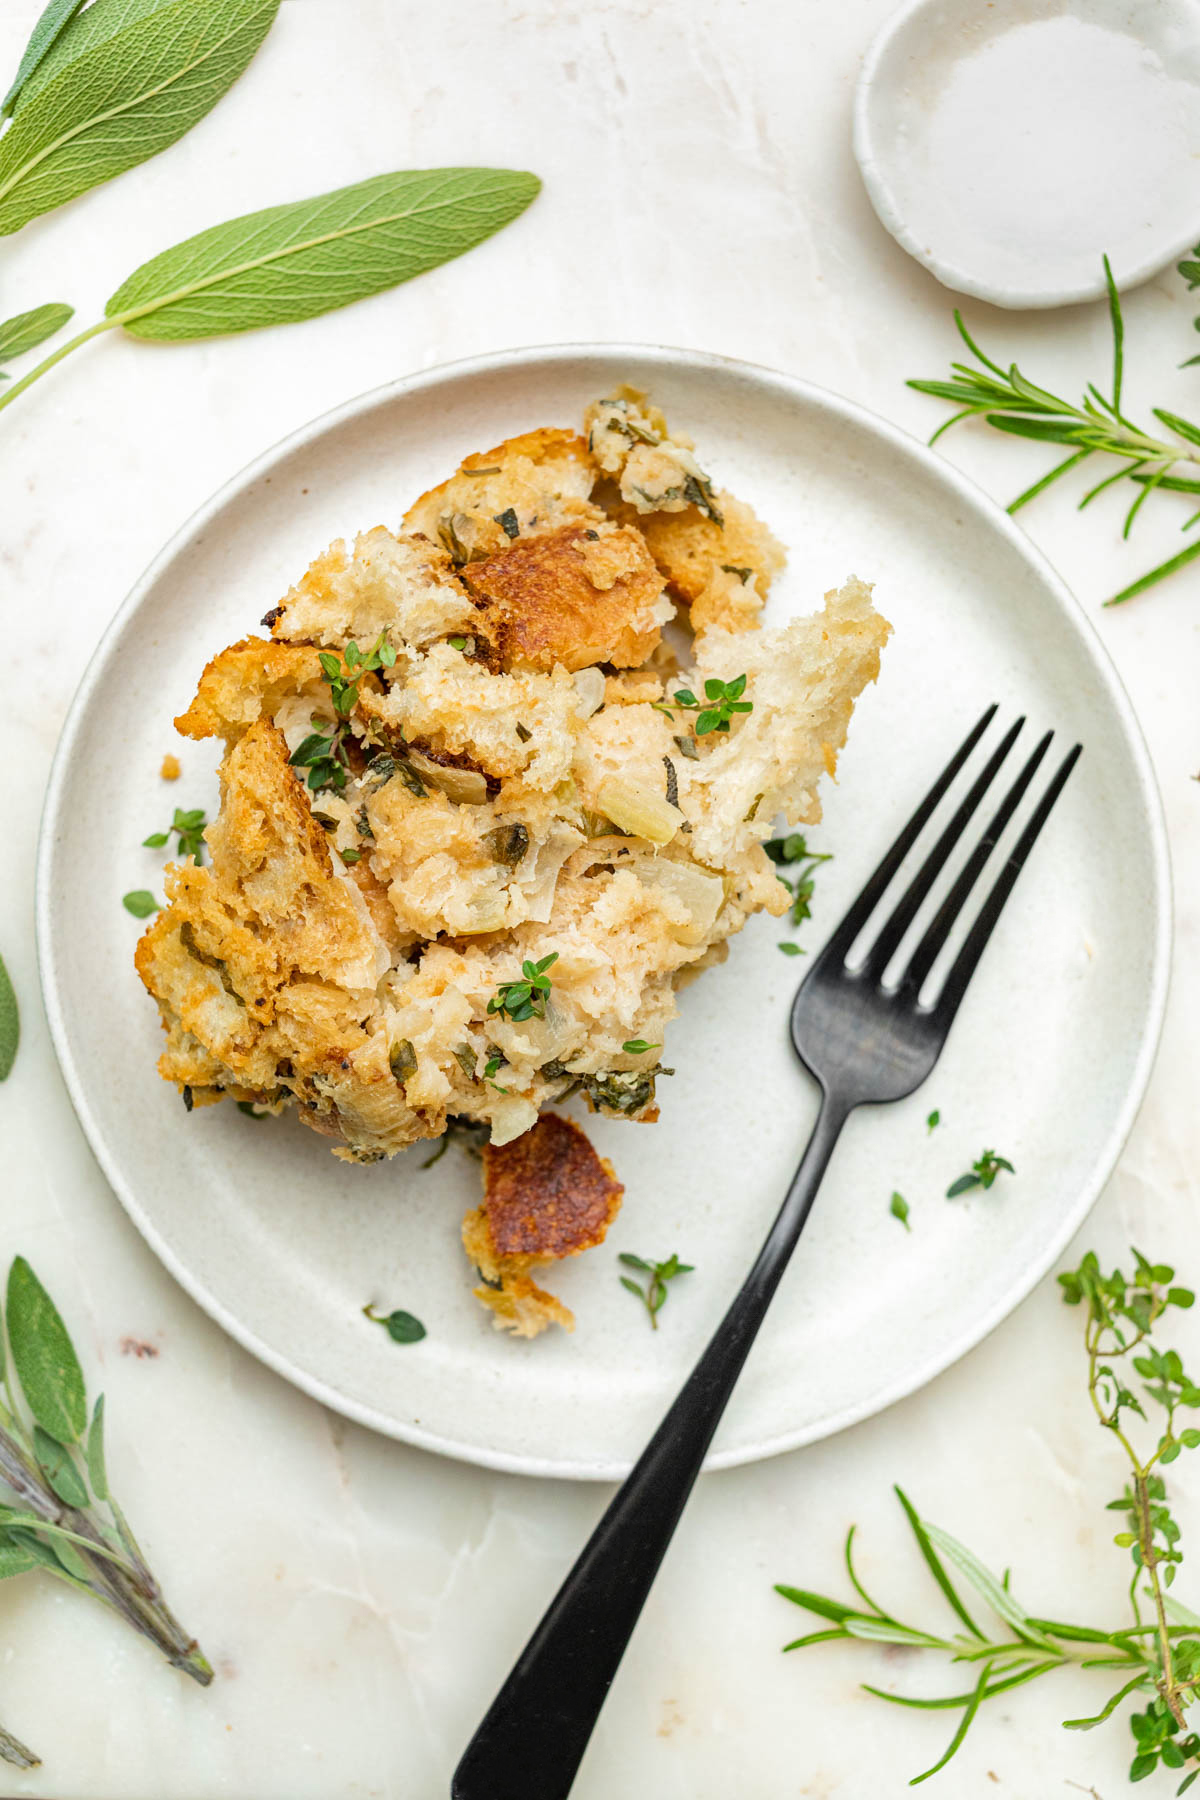 Sourdough stuffing on a small plate with a fork and herbs.